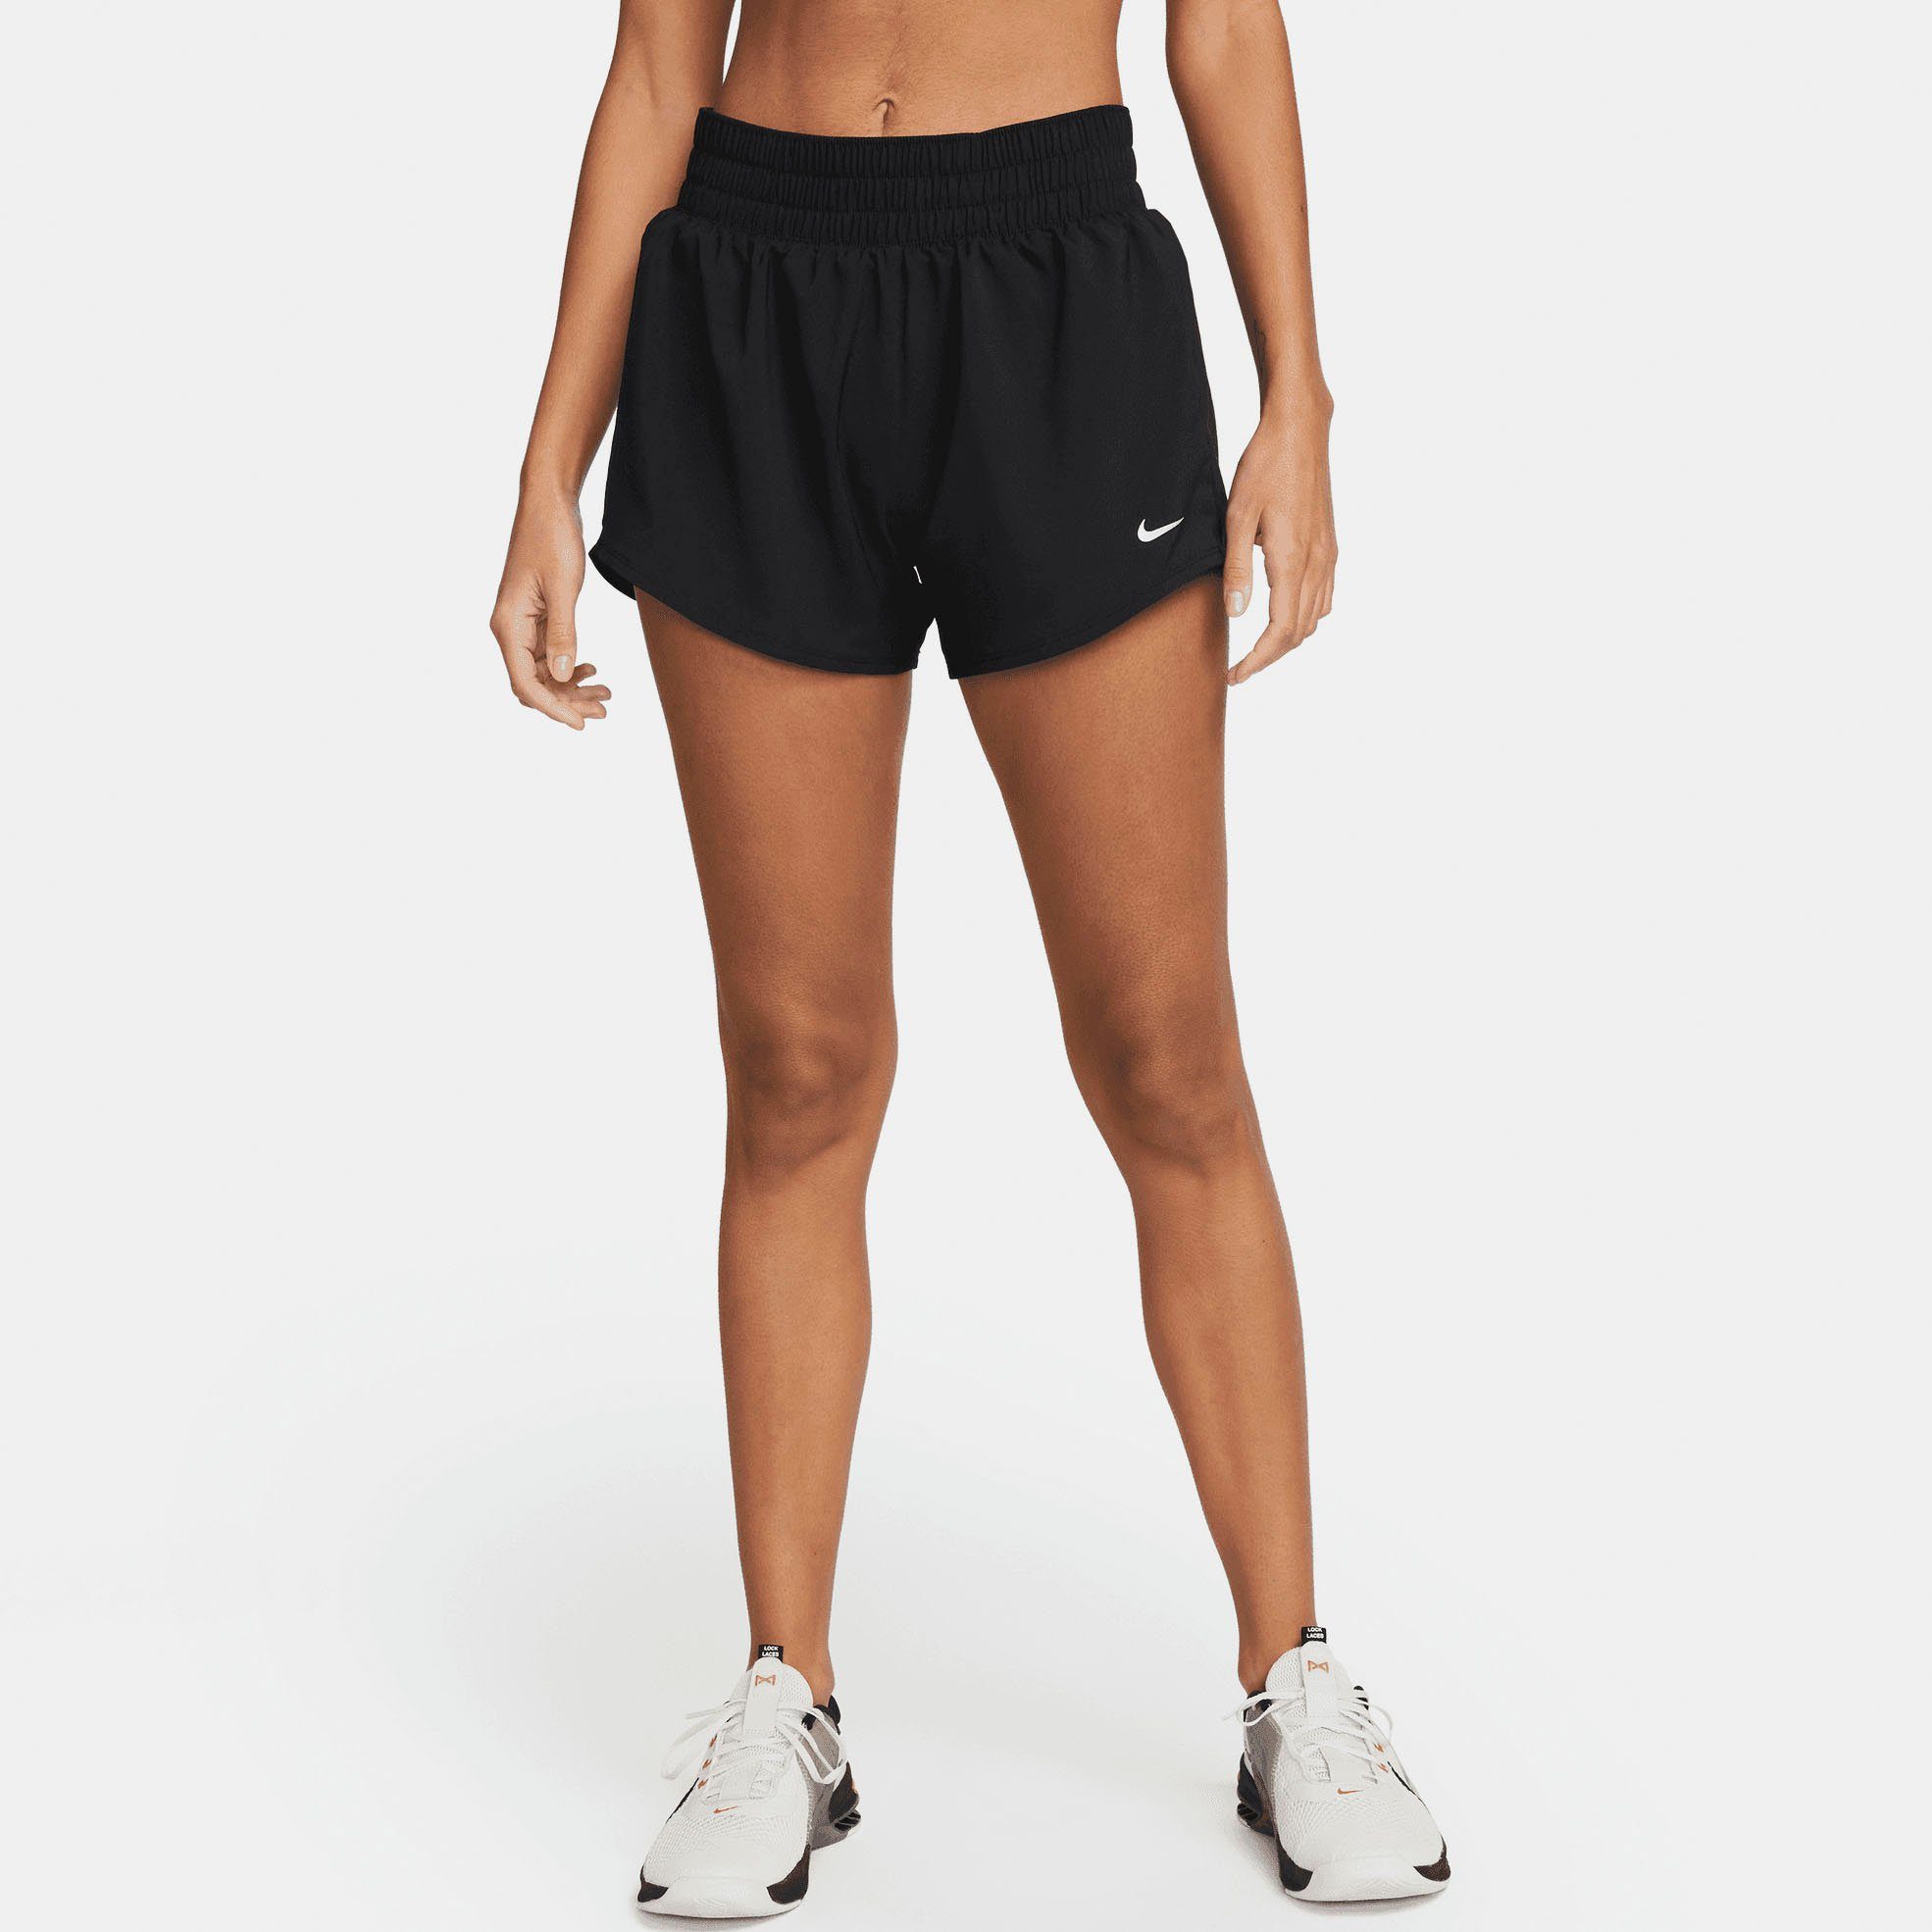 Nike Trainingsshorts DRI-FIT BLACK/REFLECTIVE MID-RISE SHORTS WOMEN'S SILV BRIEF-LINED ONE